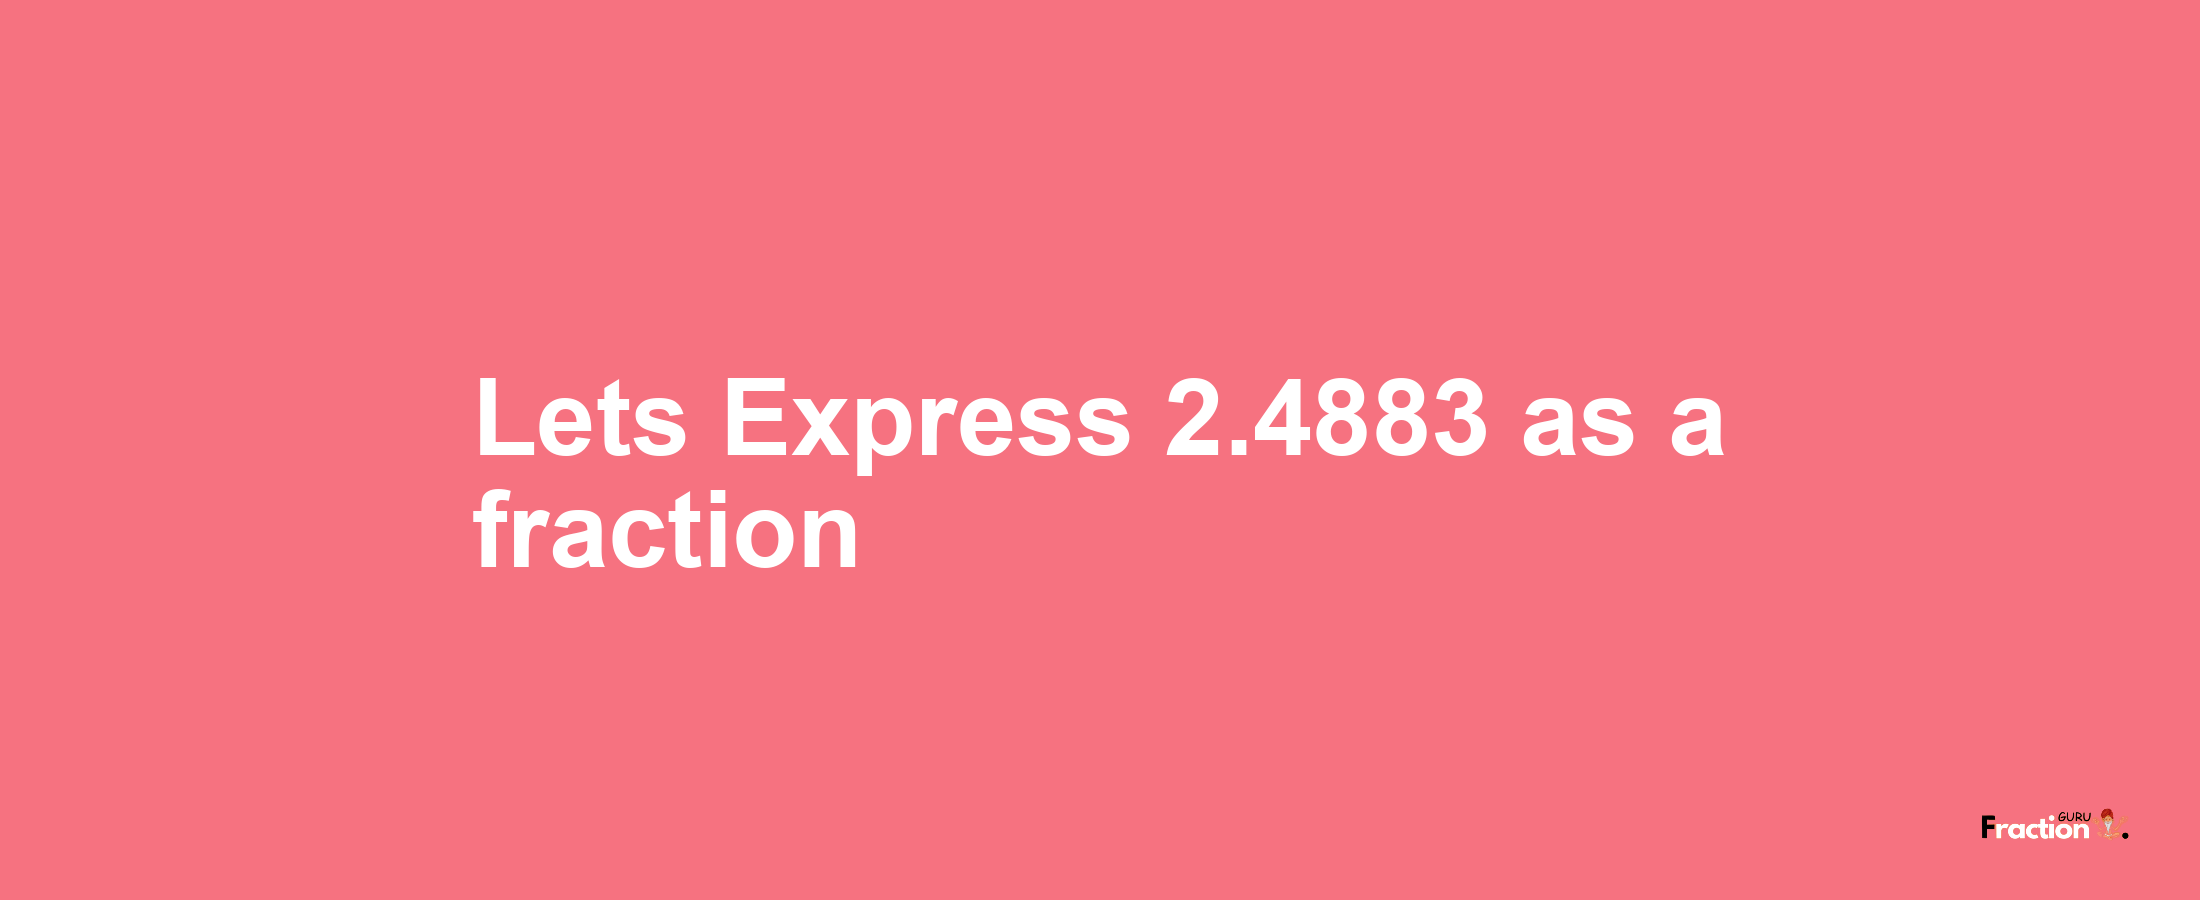 Lets Express 2.4883 as afraction